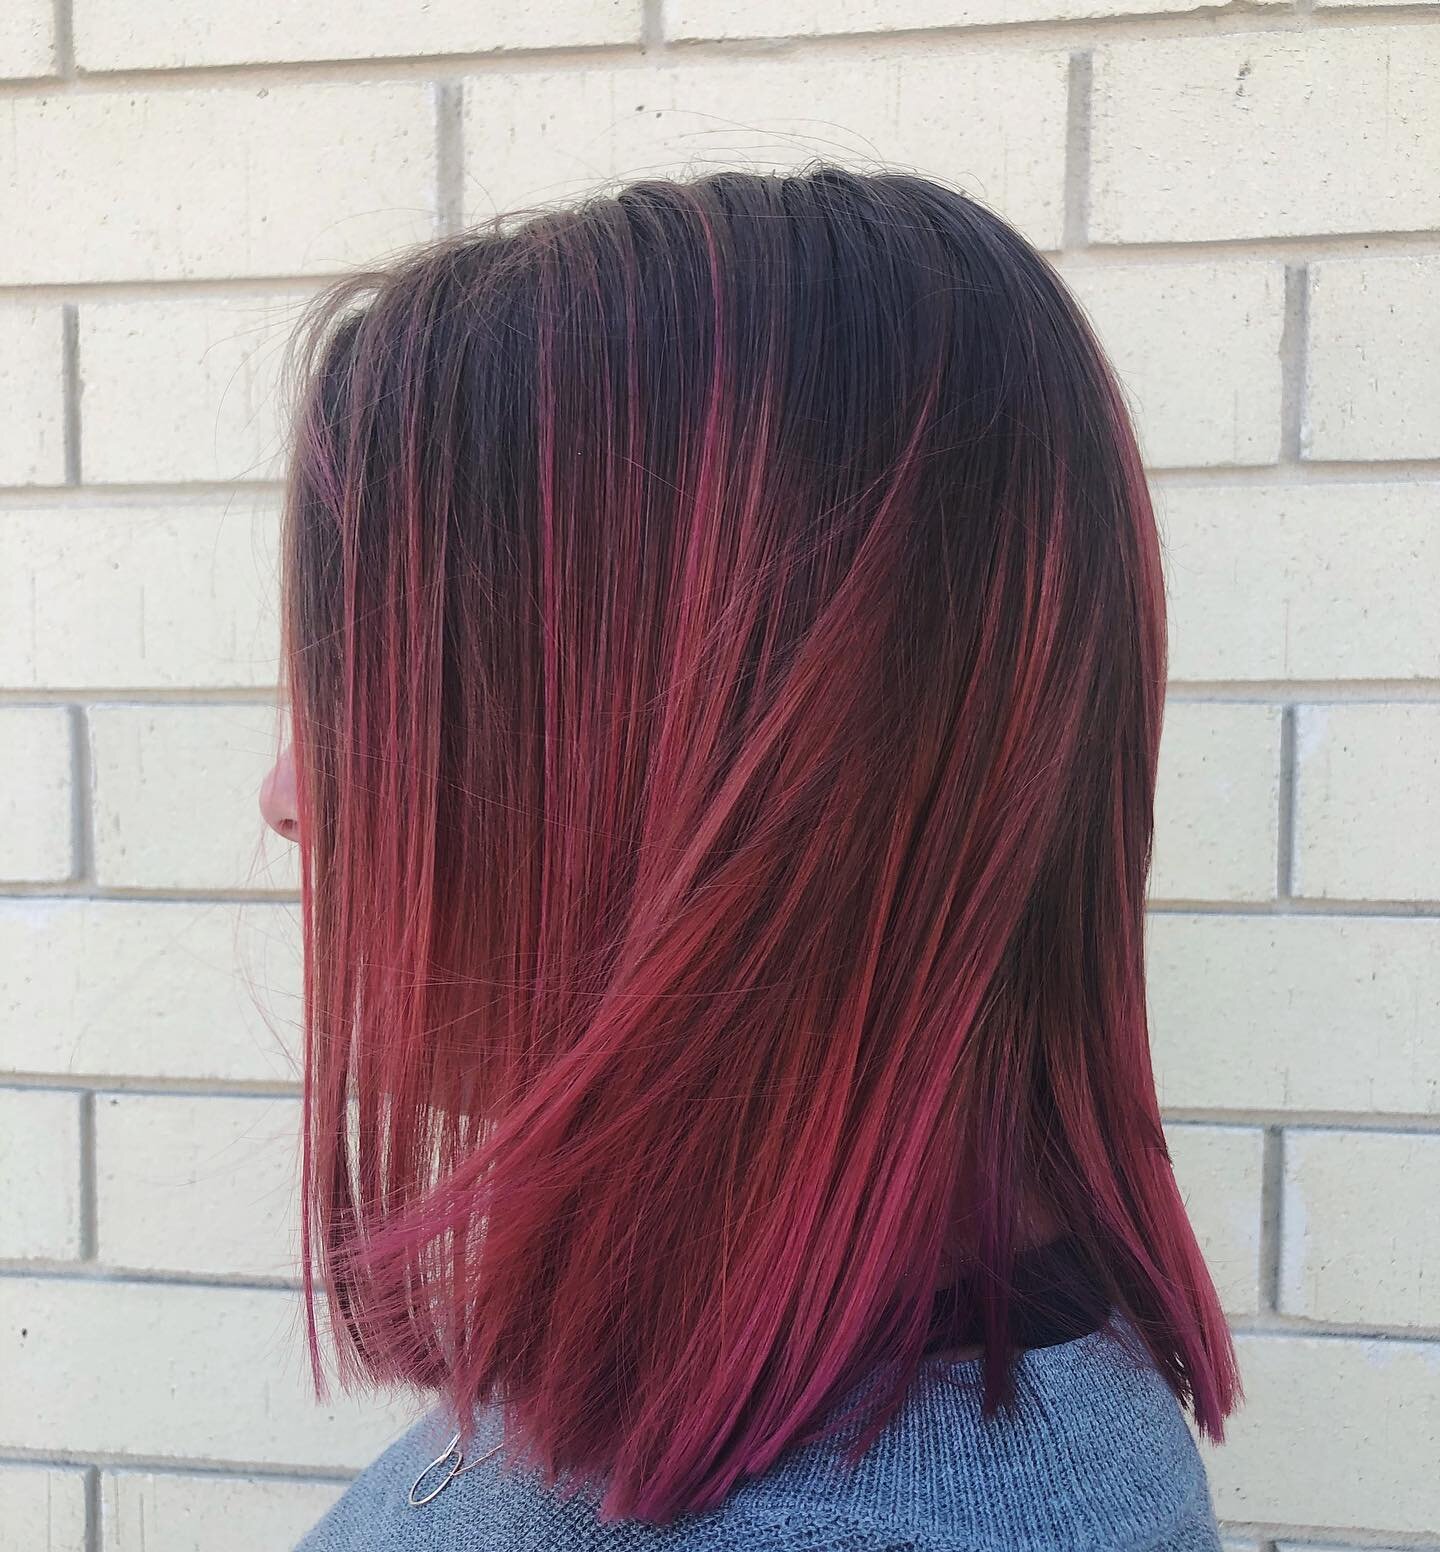 did a balayage for Shelby! i love this pink so much 🍧🍧🍧 i&rsquo;m so happy with the results! swipe for the before &bull;
&bull;
&bull;
&bull;
&bull;
&bull;
&bull;
#avedachapelhill #pinkhair #cosstudent #hairdye #cosmetologyschool #avedacolor #aved